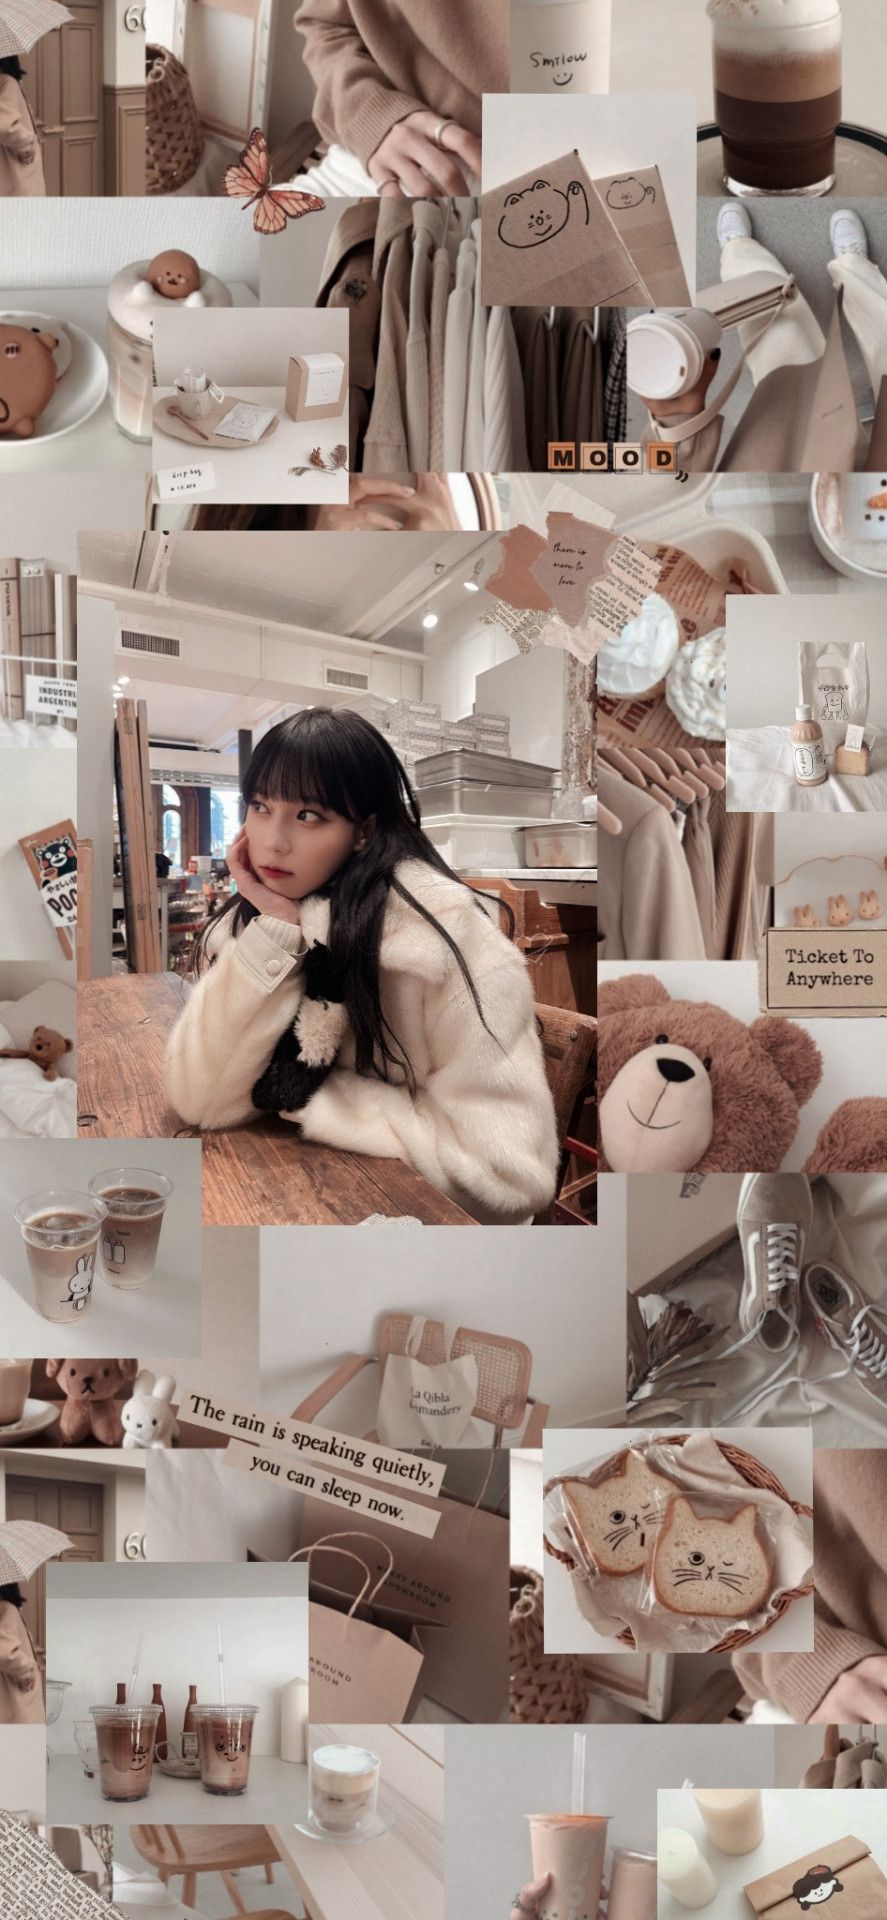 Aesthetic pictures of a girl, teddy bears, food, and other items. - Aespa